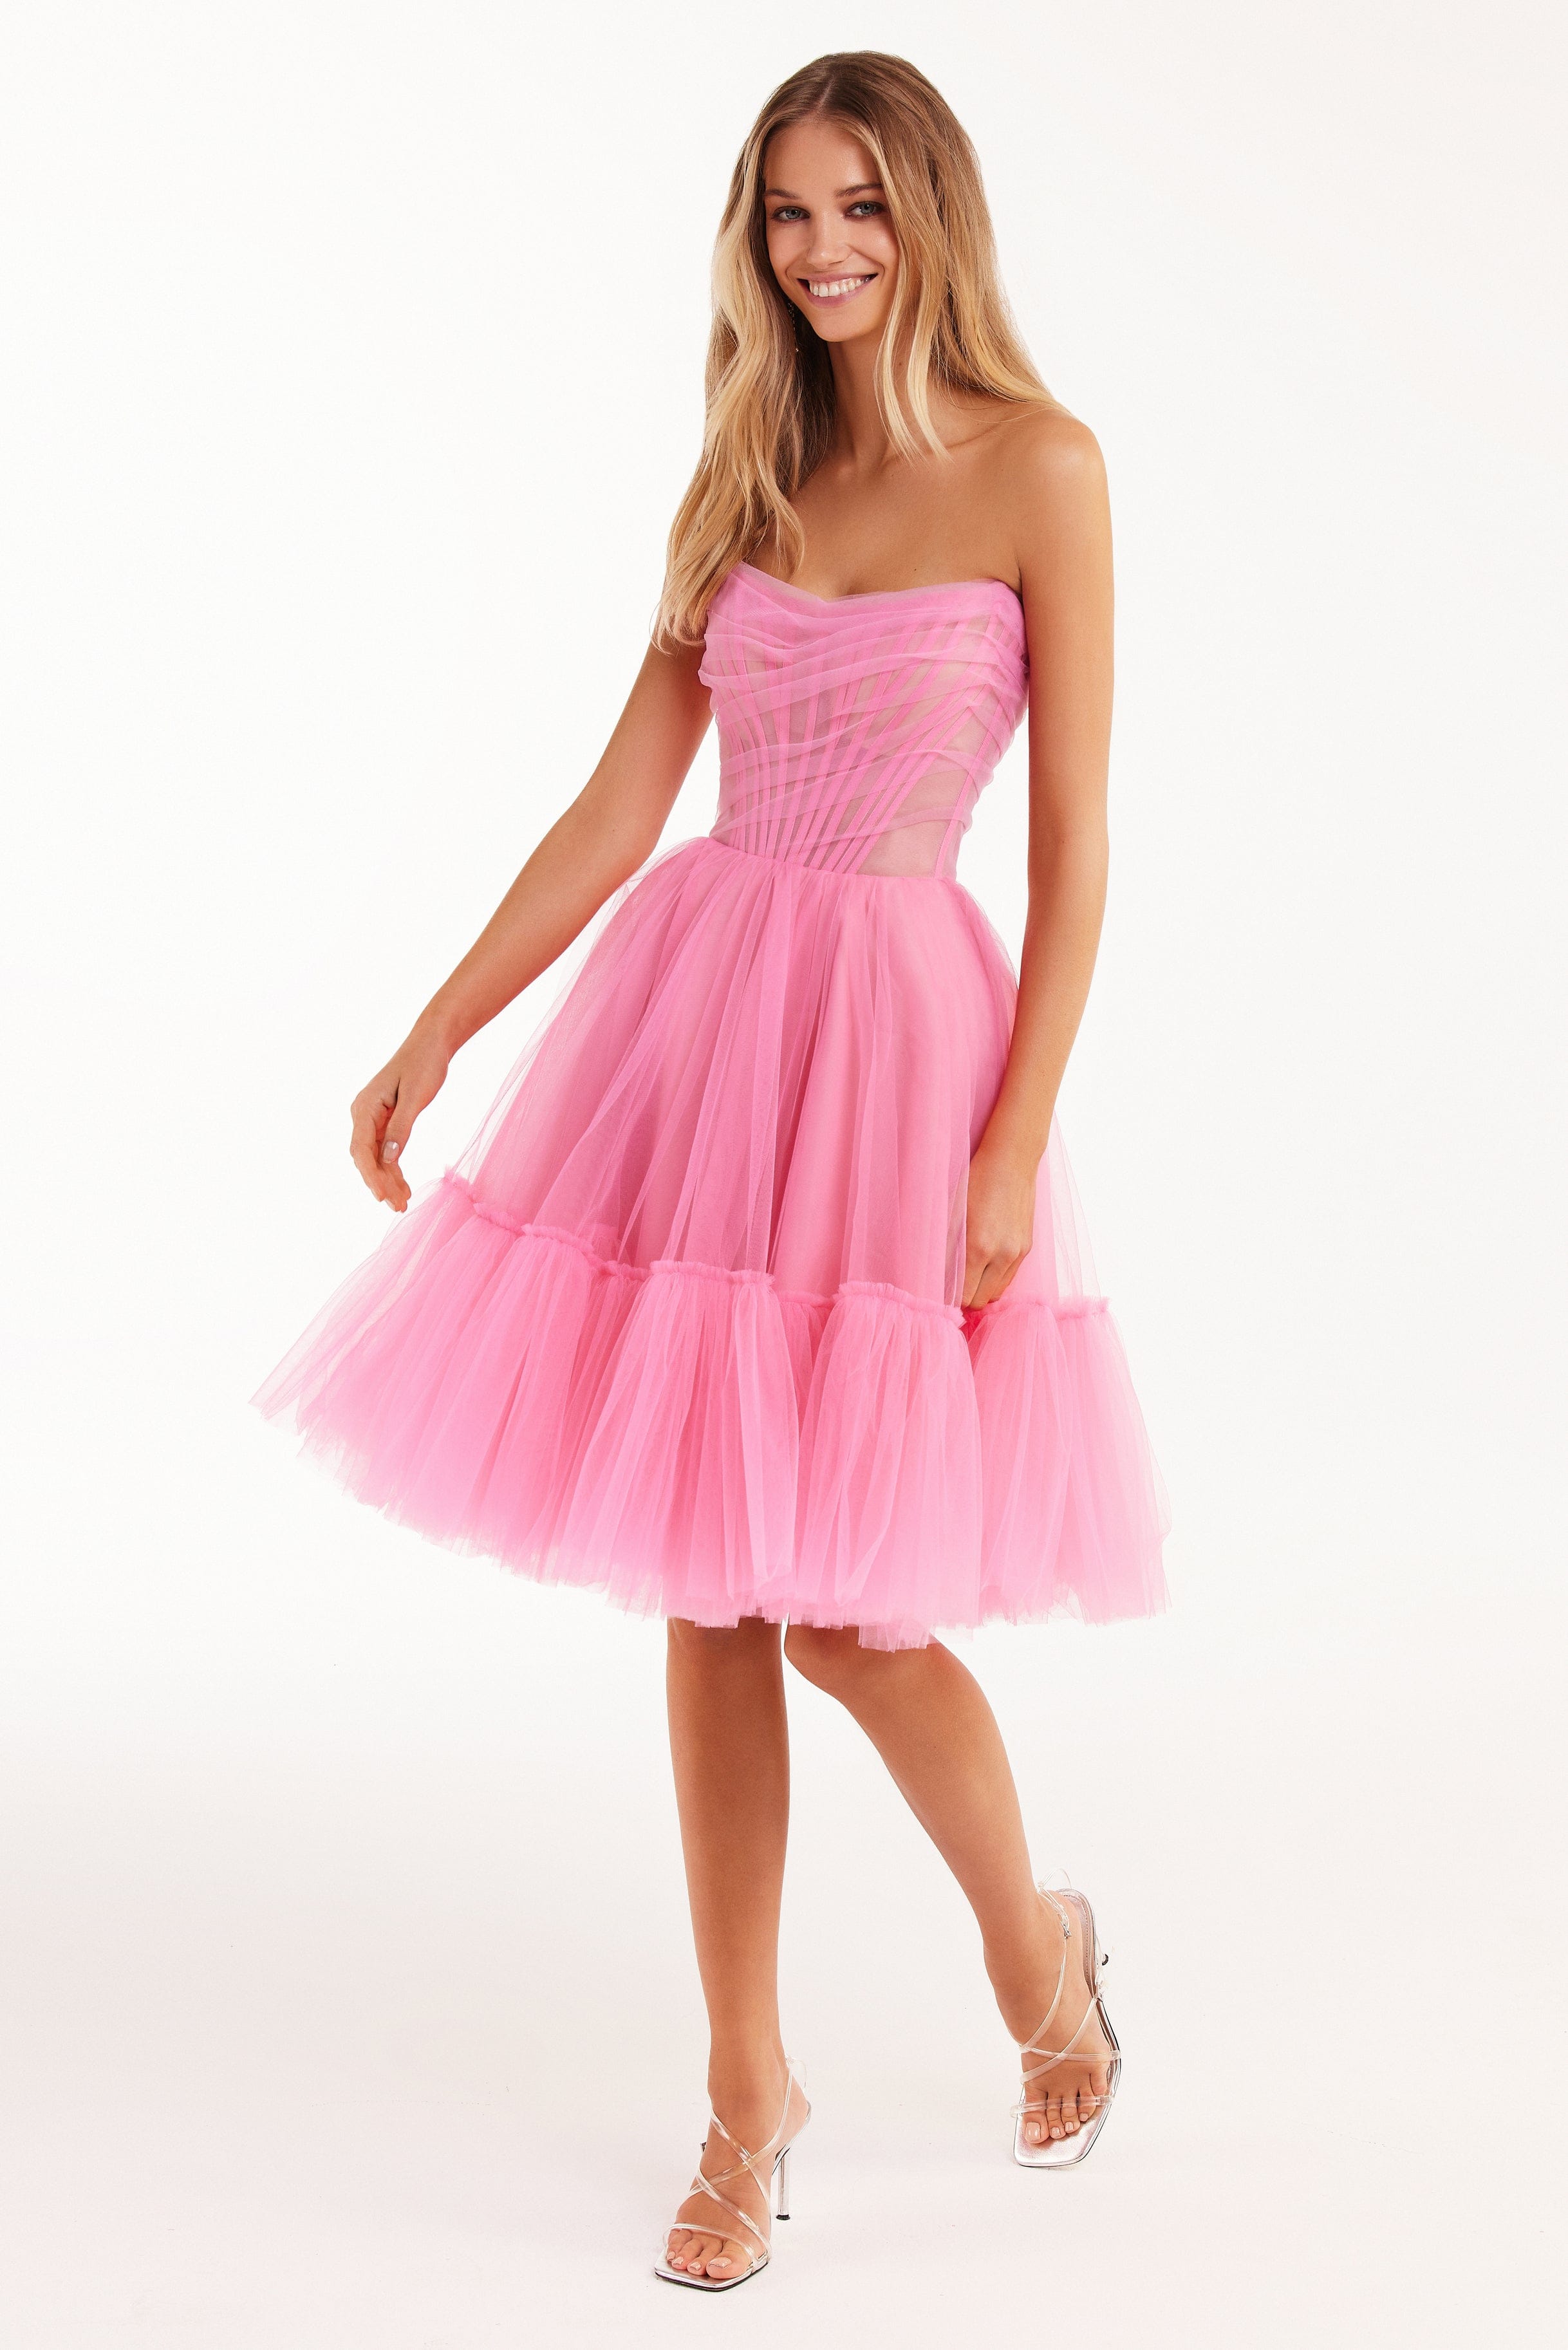 Emmary Gown - Bustier Bodice Tulle Gown in Pink